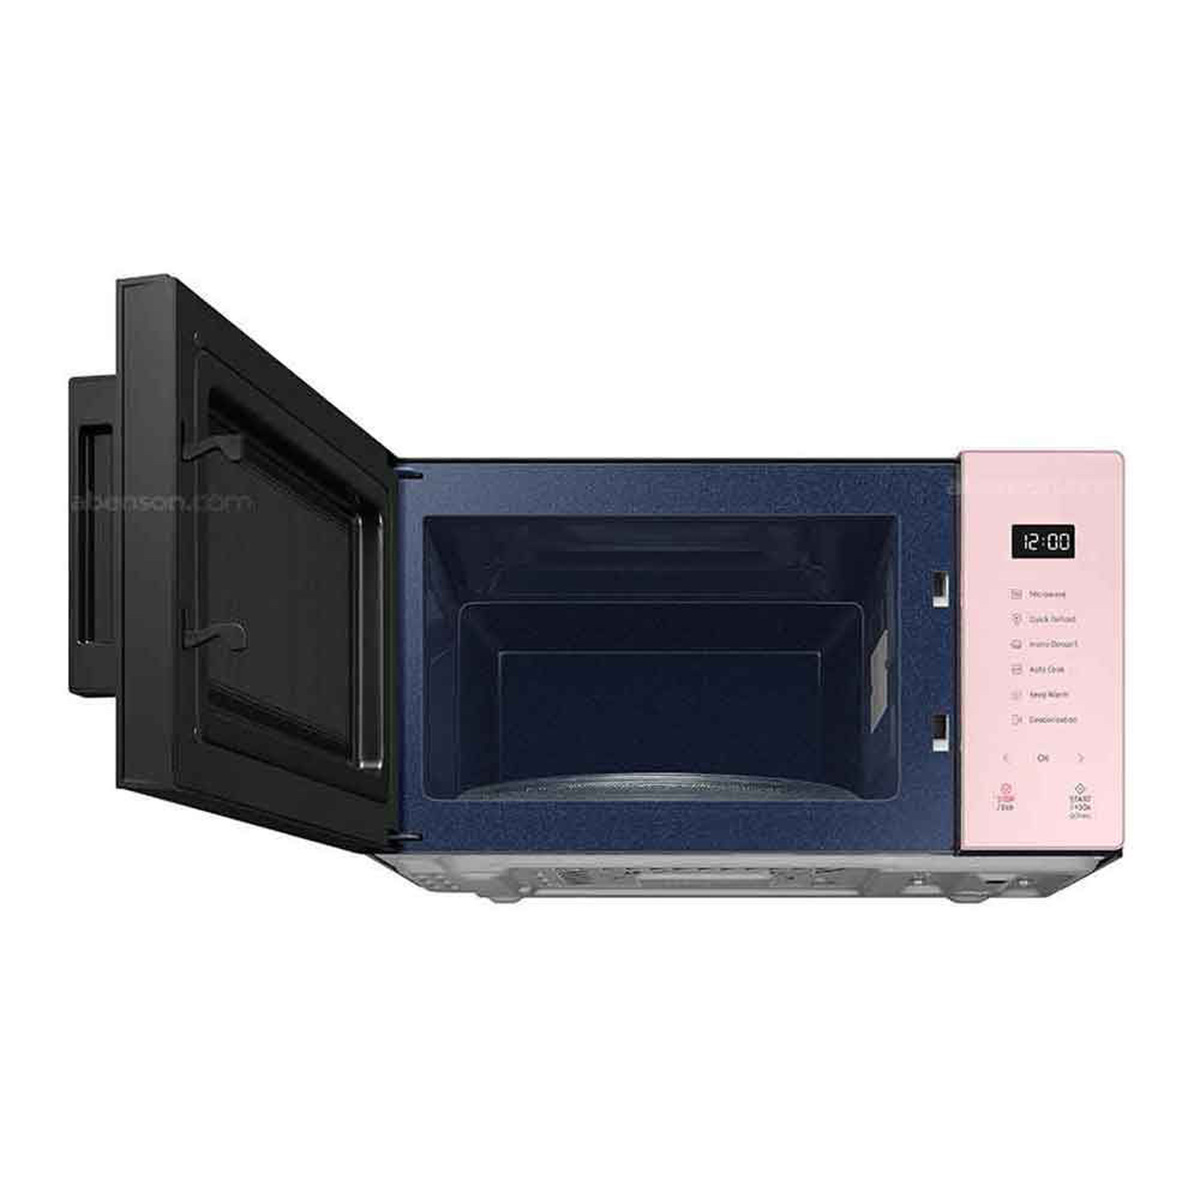 Samsung Bespoke Microwave Oven Solo with Deodorization, 23 L, Pink, MS23T5018AP/SG